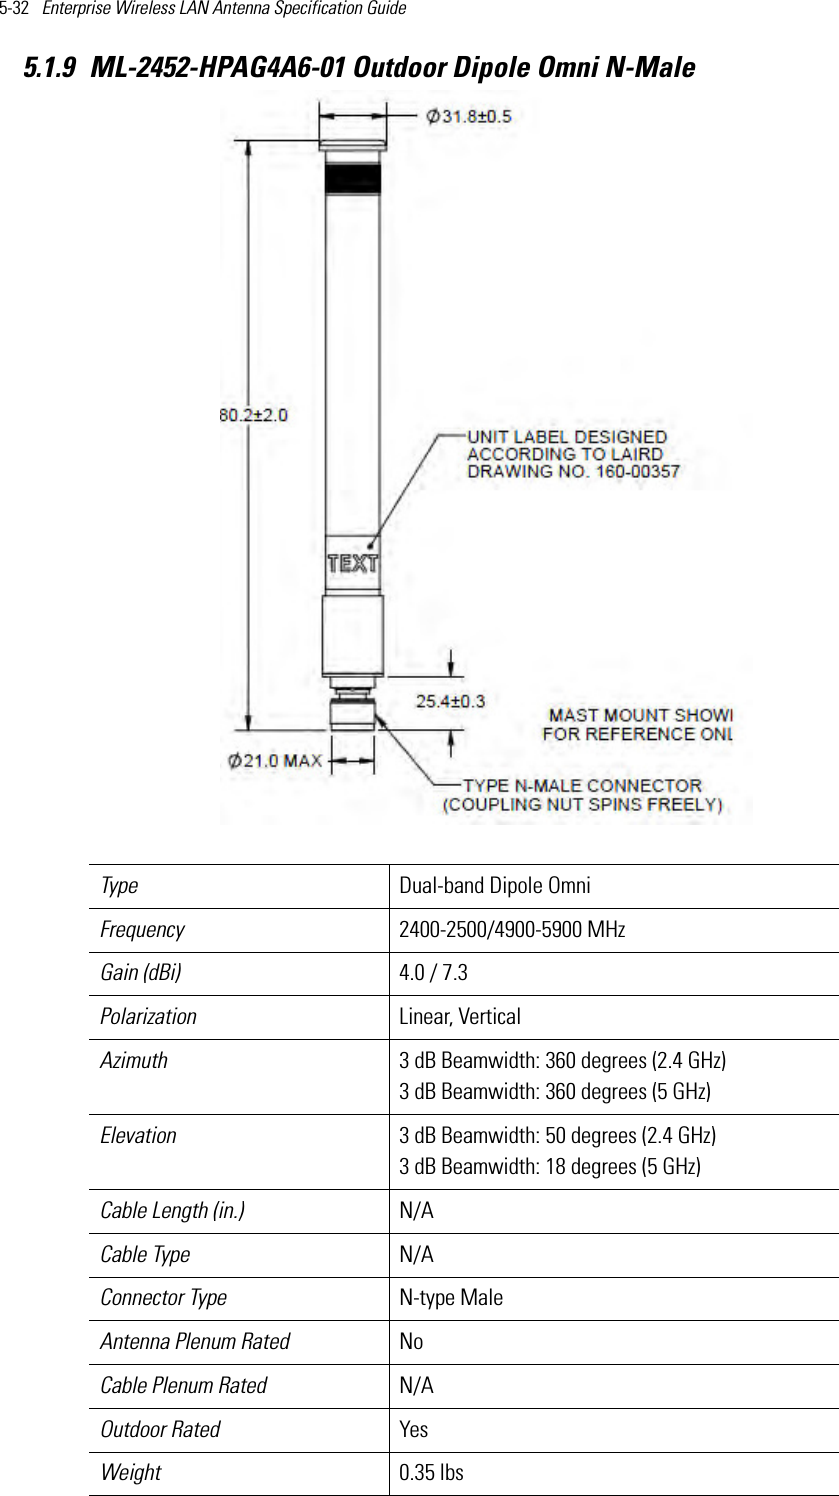 5-32   Enterprise Wireless LAN Antenna Specification Guide 5.1.9 ML-2452-HPAG4A6-01 Outdoor Dipole Omni N-Male  Type Dual-band Dipole OmniFrequency 2400-2500/4900-5900 MHzGain (dBi) 4.0 / 7.3Polarization Linear, VerticalAzimuth 3 dB Beamwidth: 360 degrees (2.4 GHz)3 dB Beamwidth: 360 degrees (5 GHz) Elevation 3 dB Beamwidth: 50 degrees (2.4 GHz)3 dB Beamwidth: 18 degrees (5 GHz)  Cable Length (in.) N/ACable Type N/AConnector Type N-type MaleAntenna Plenum Rated NoCable Plenum Rated N/AOutdoor Rated YesWeight 0.35 lbs